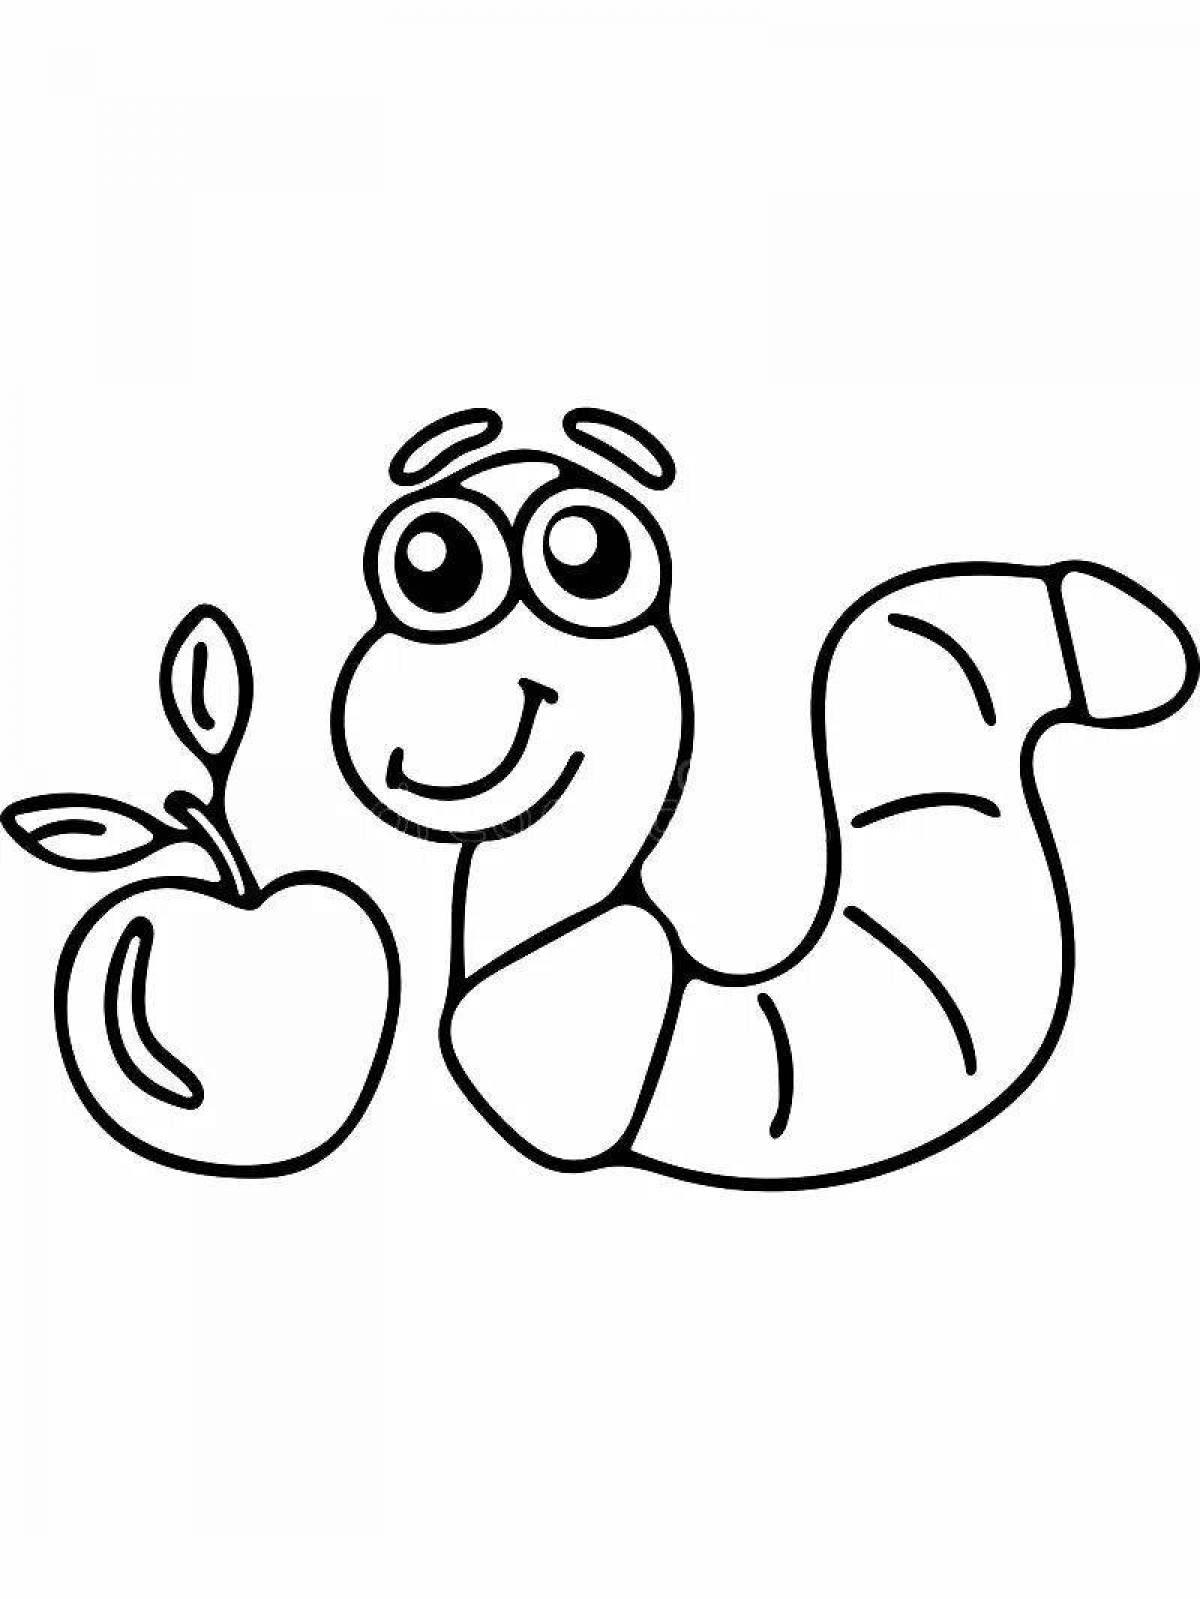 Funny worm coloring book for kids